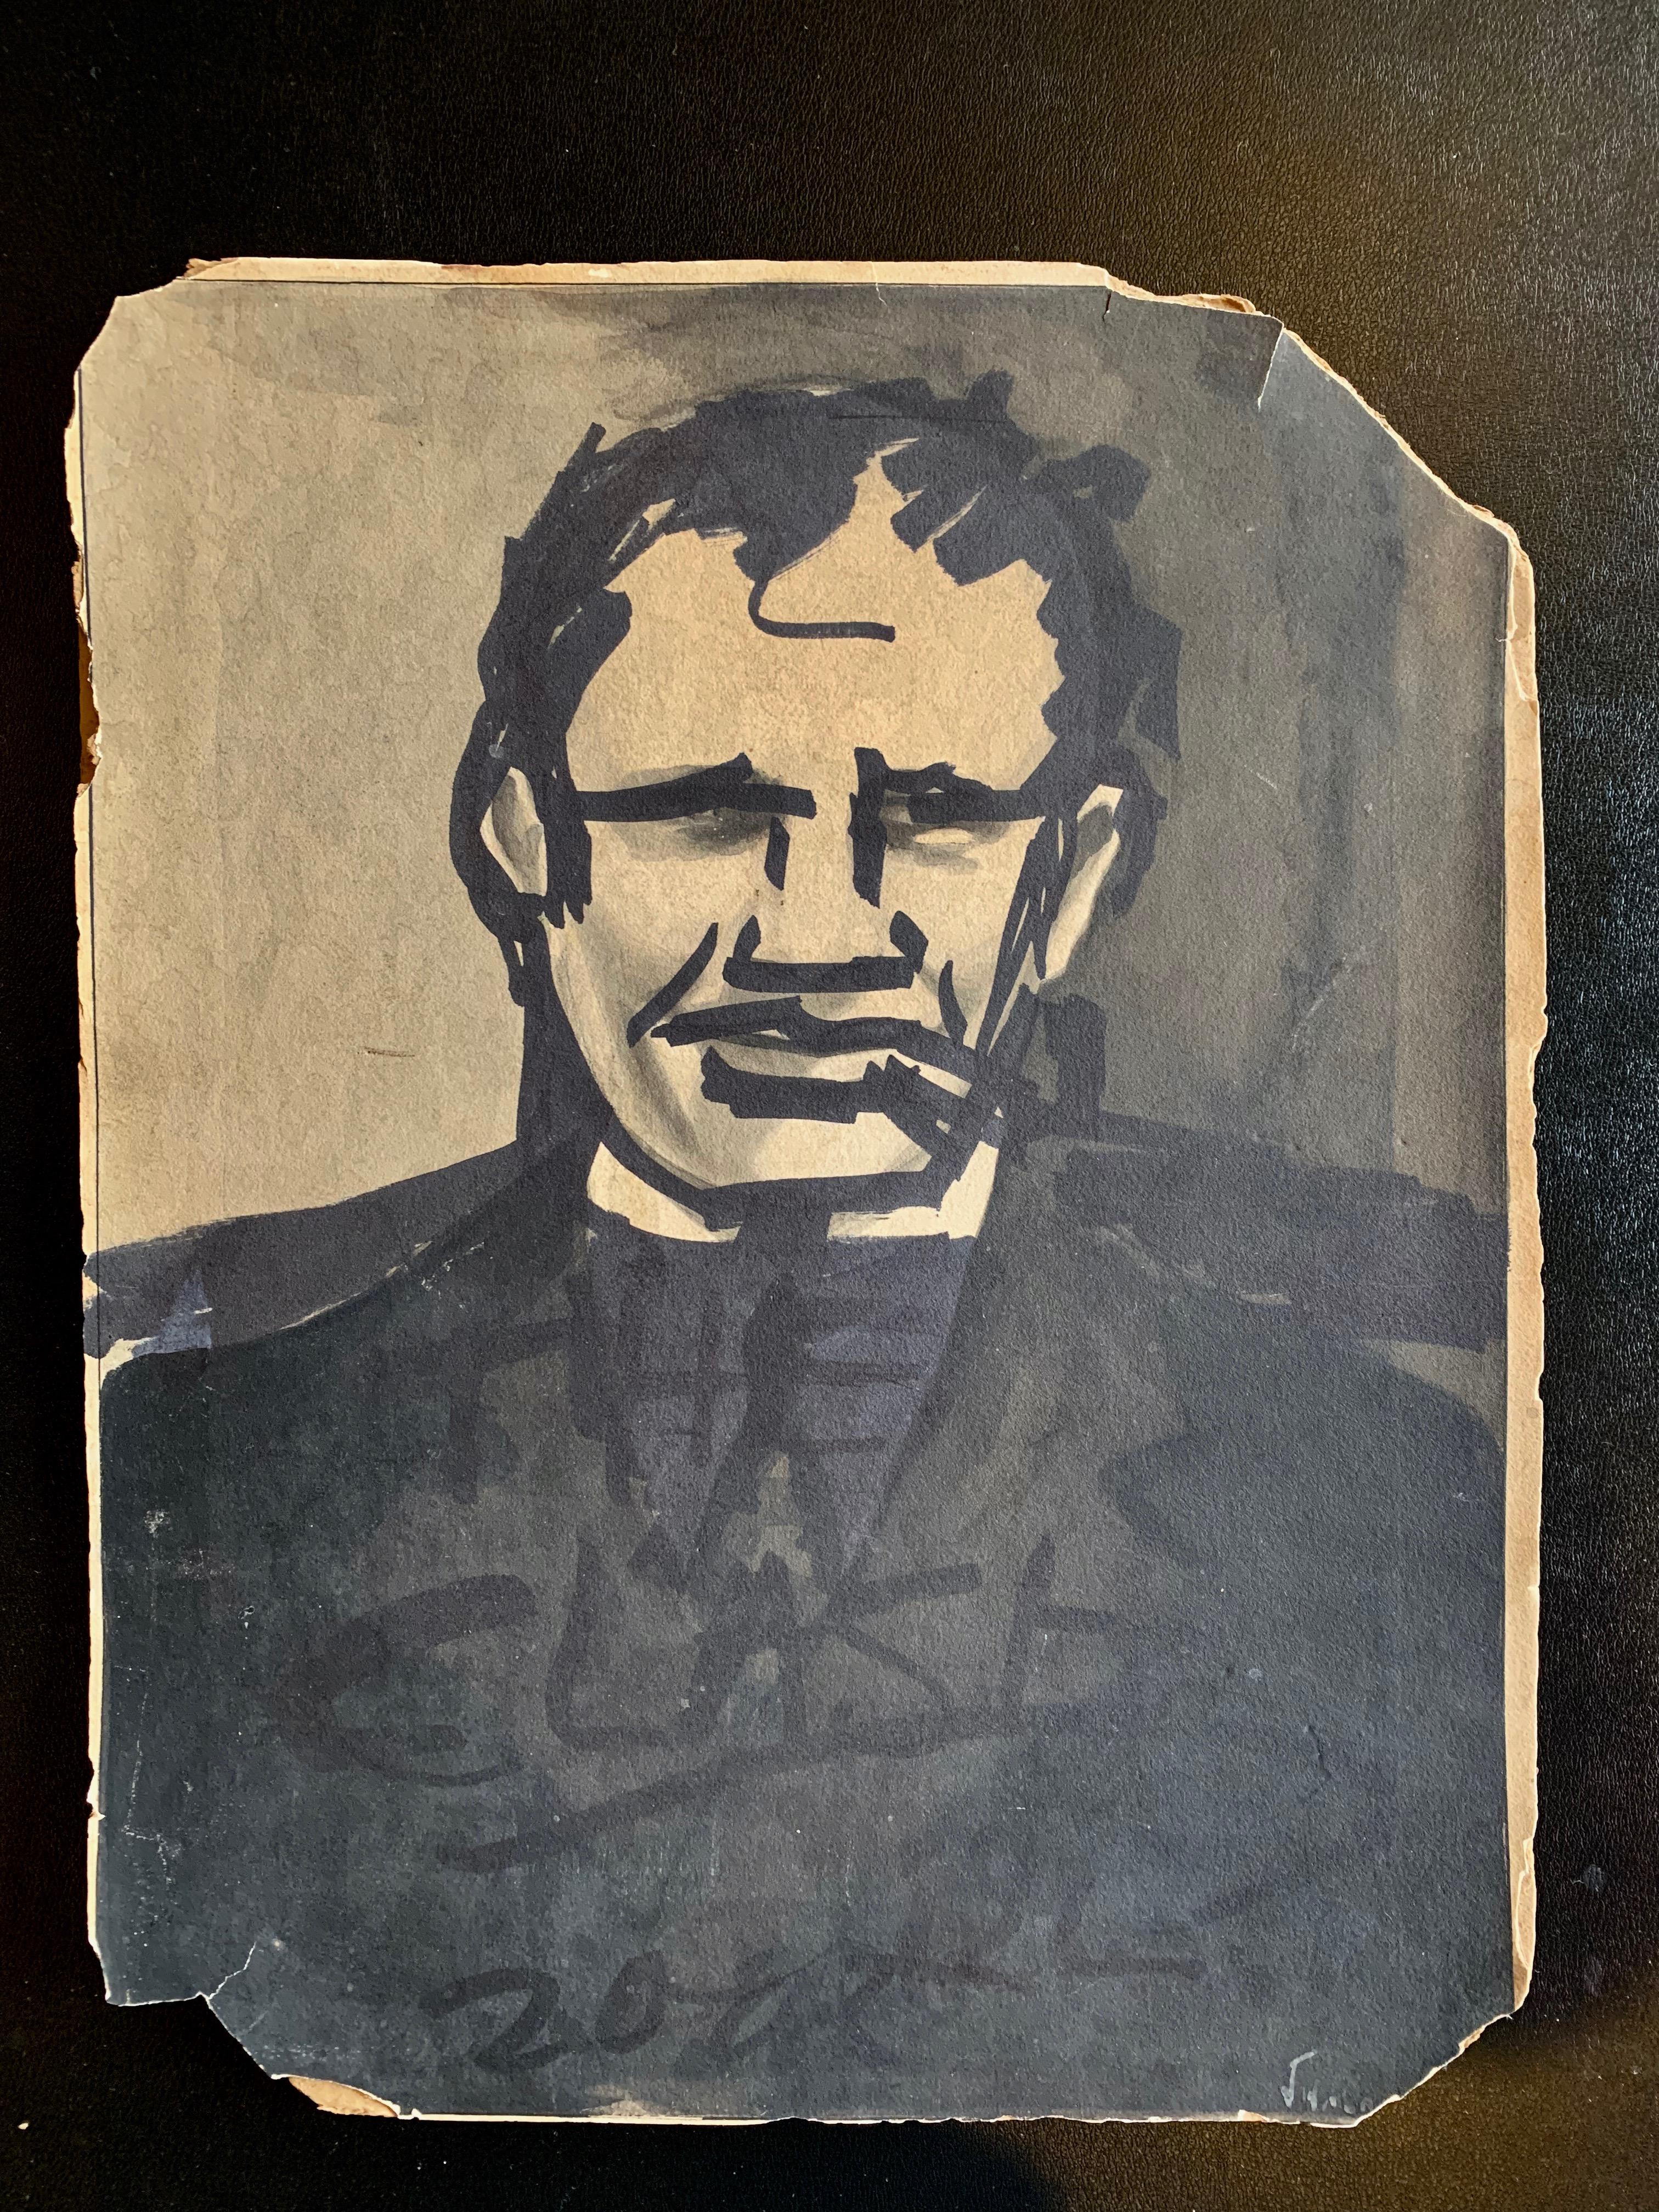 Great original drawing by Robert Loughlin on cardboard. Large front facing image of 'the Brute' wearing a suit. Titled 'The Clash' on the front. Signed RL on the back and dated 2005. Also titled 